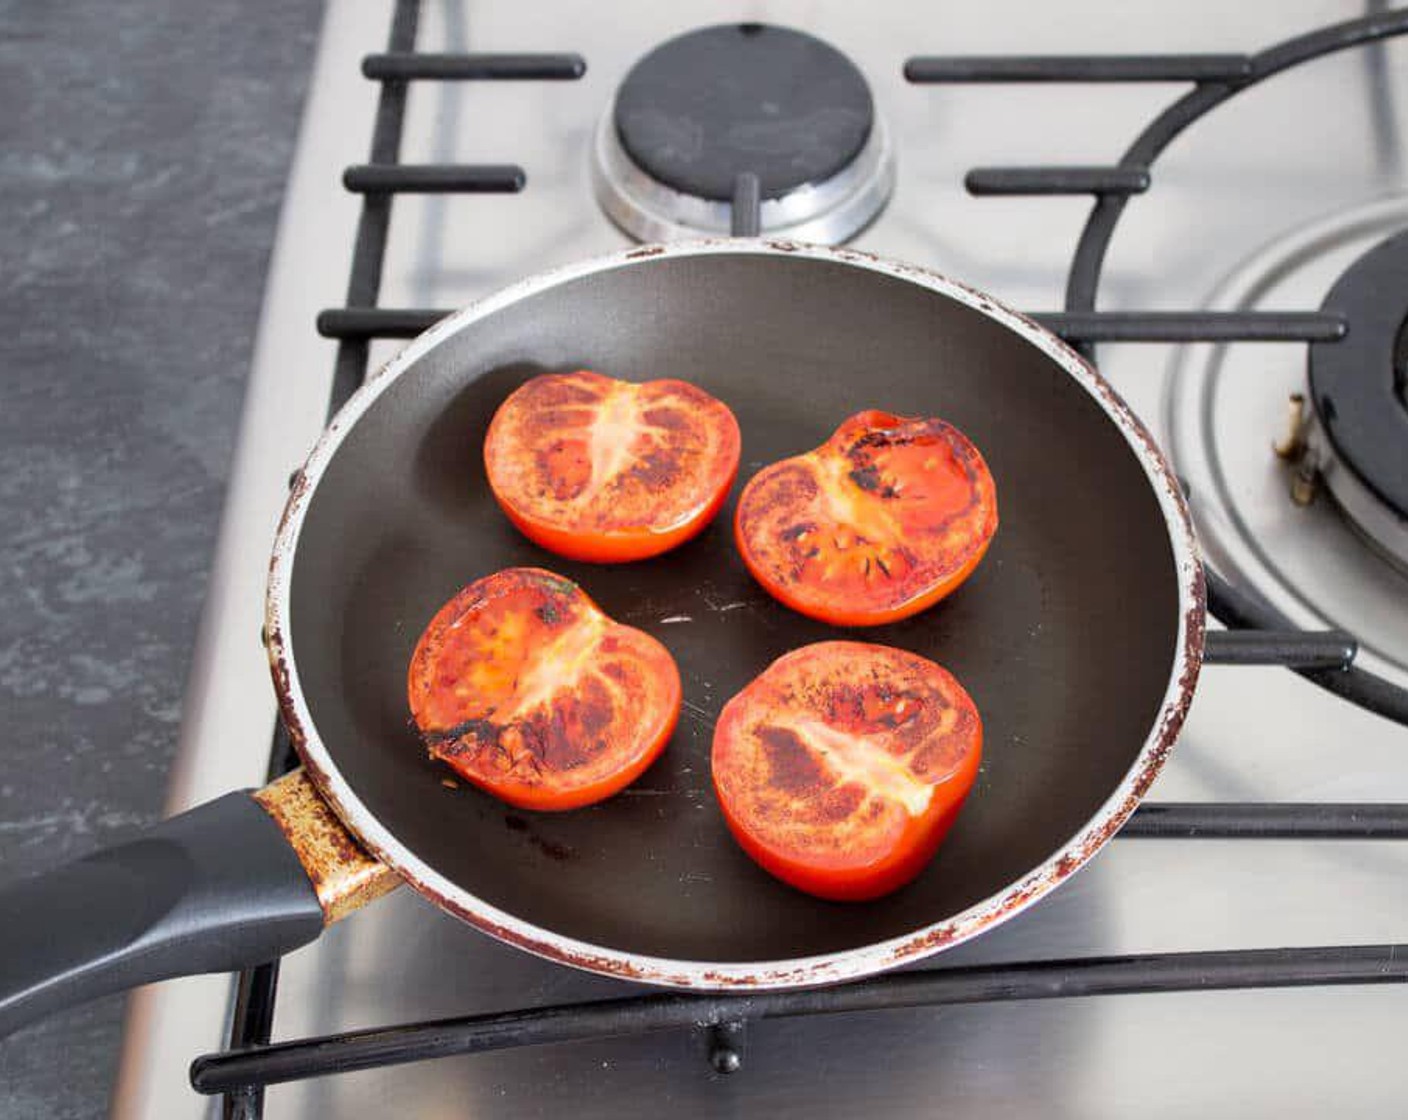 step 1 In a small frying pan (mine was about 8''/20 cm) heat Olive Oil (1 tsp) over a low heat then add the sliced Tomatoes (2) face down. Fry for about 5-10 minutes until softened then flip them over and cook for 3-4 minutes more.